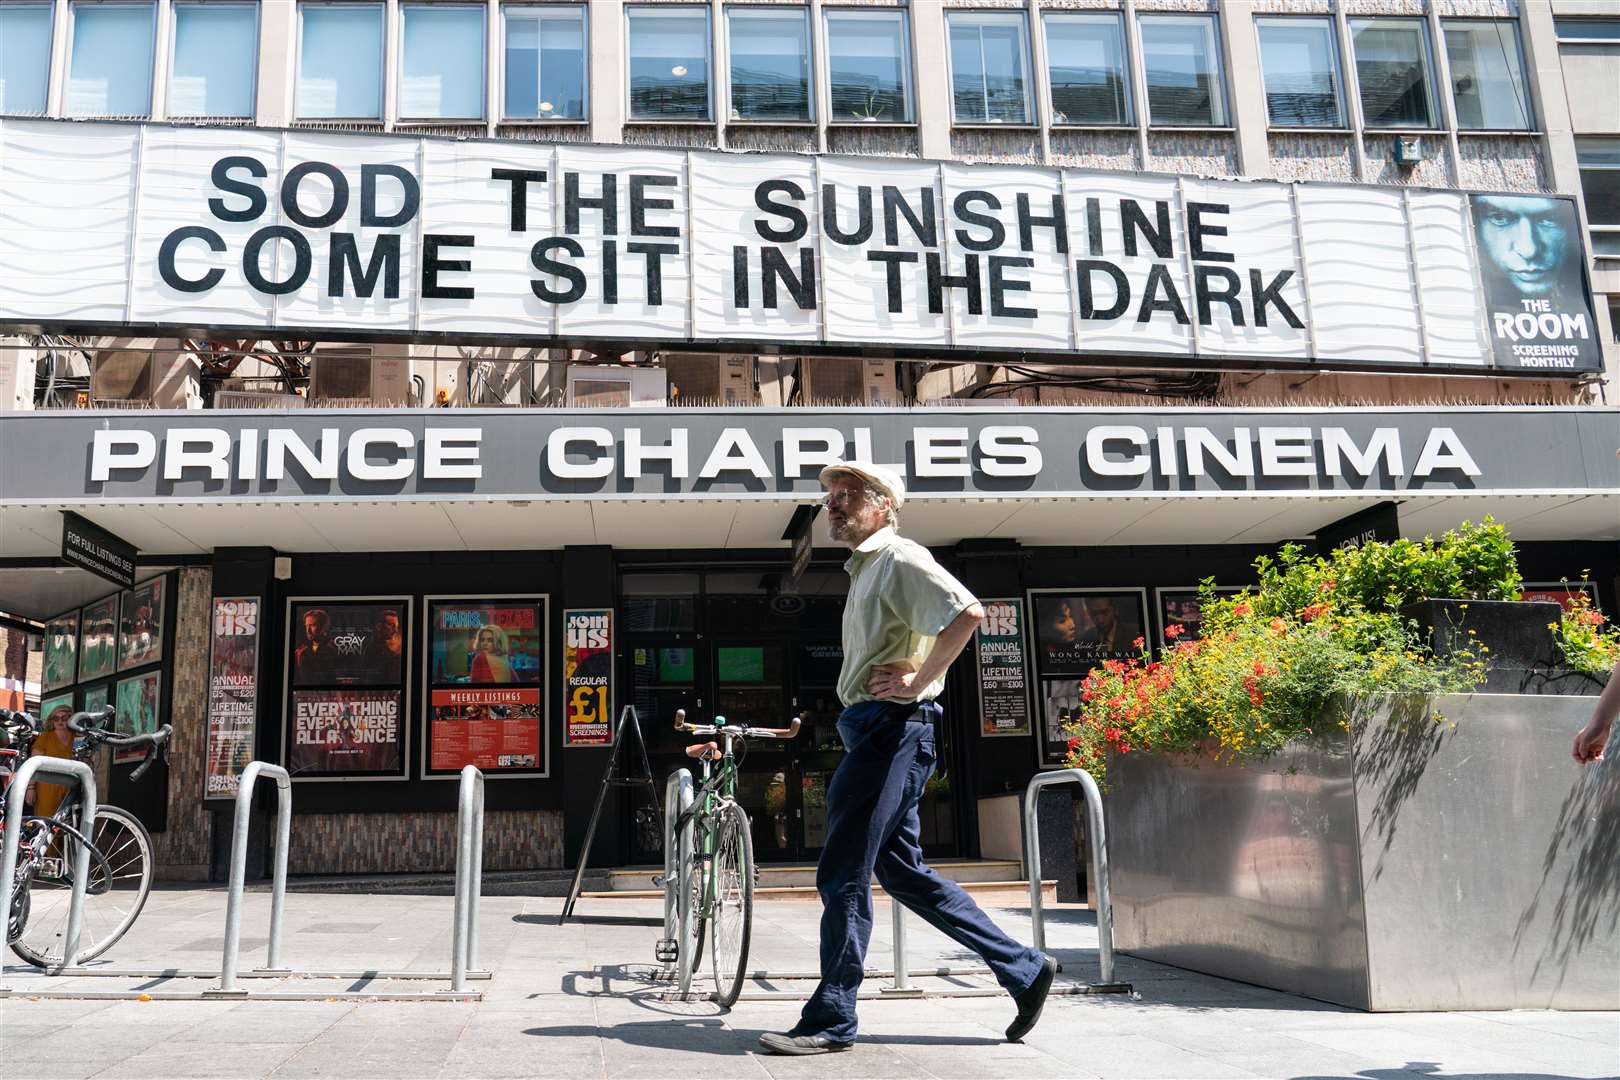 The Prince Charles Cinema in London found a novel way to attract customers (Dominic Lipinski/PA)